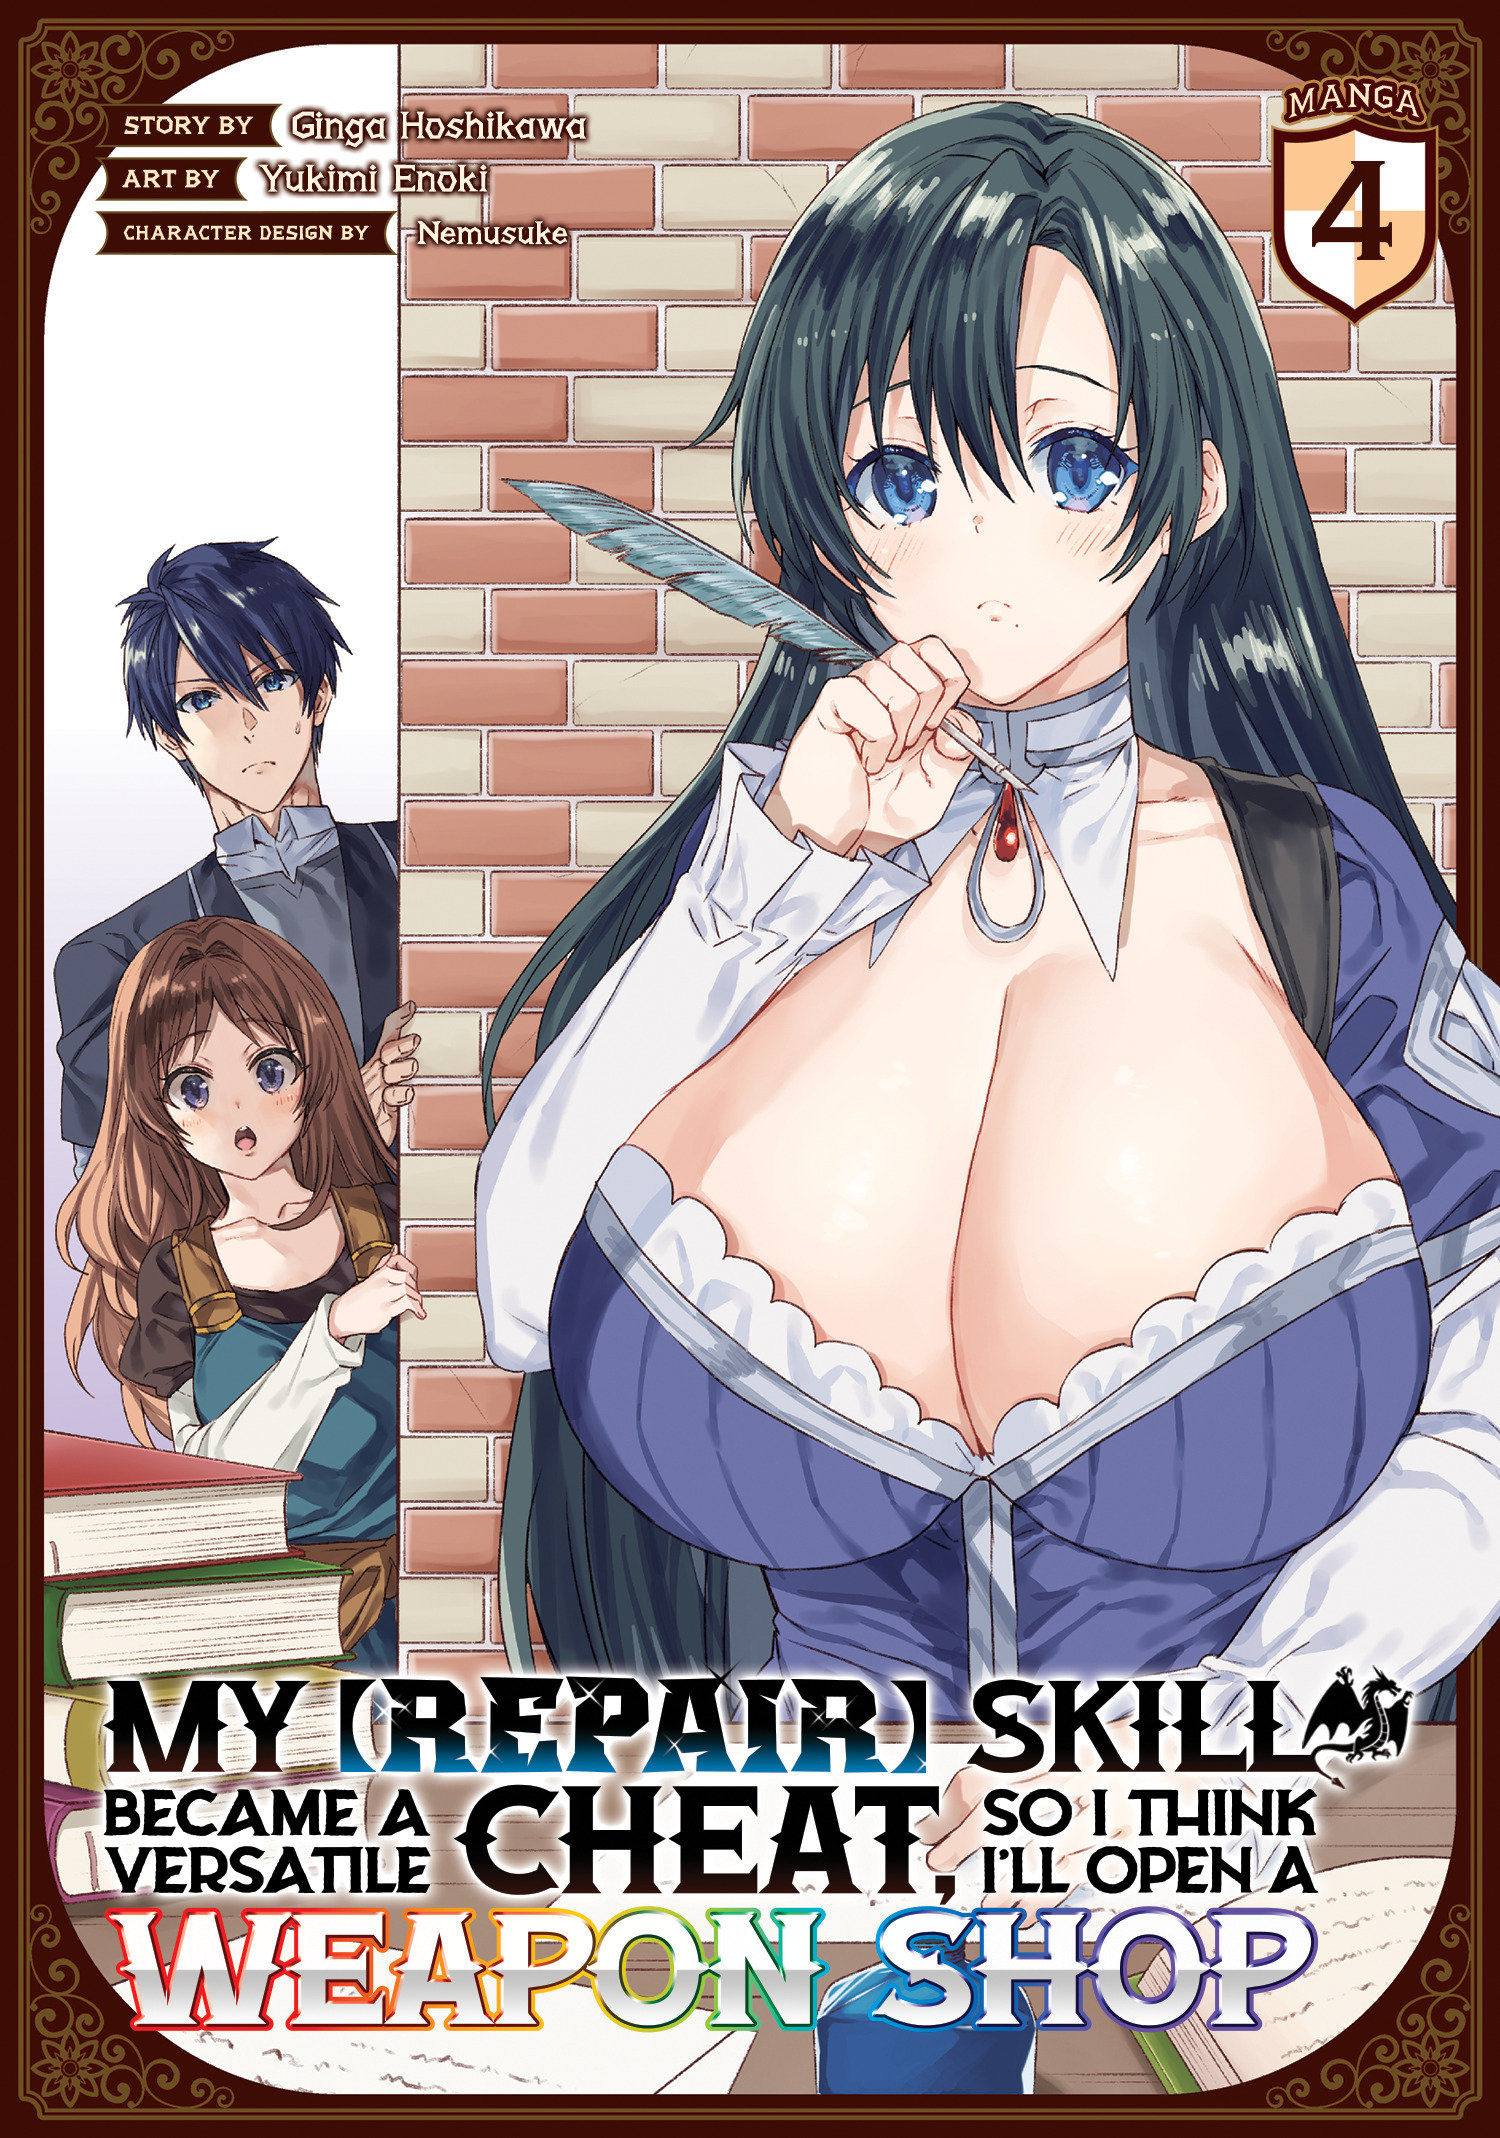 Since My Repair Skill Became a Versatile Cheat, I Think I'll Open a Weapon Shop Manga Volume 4